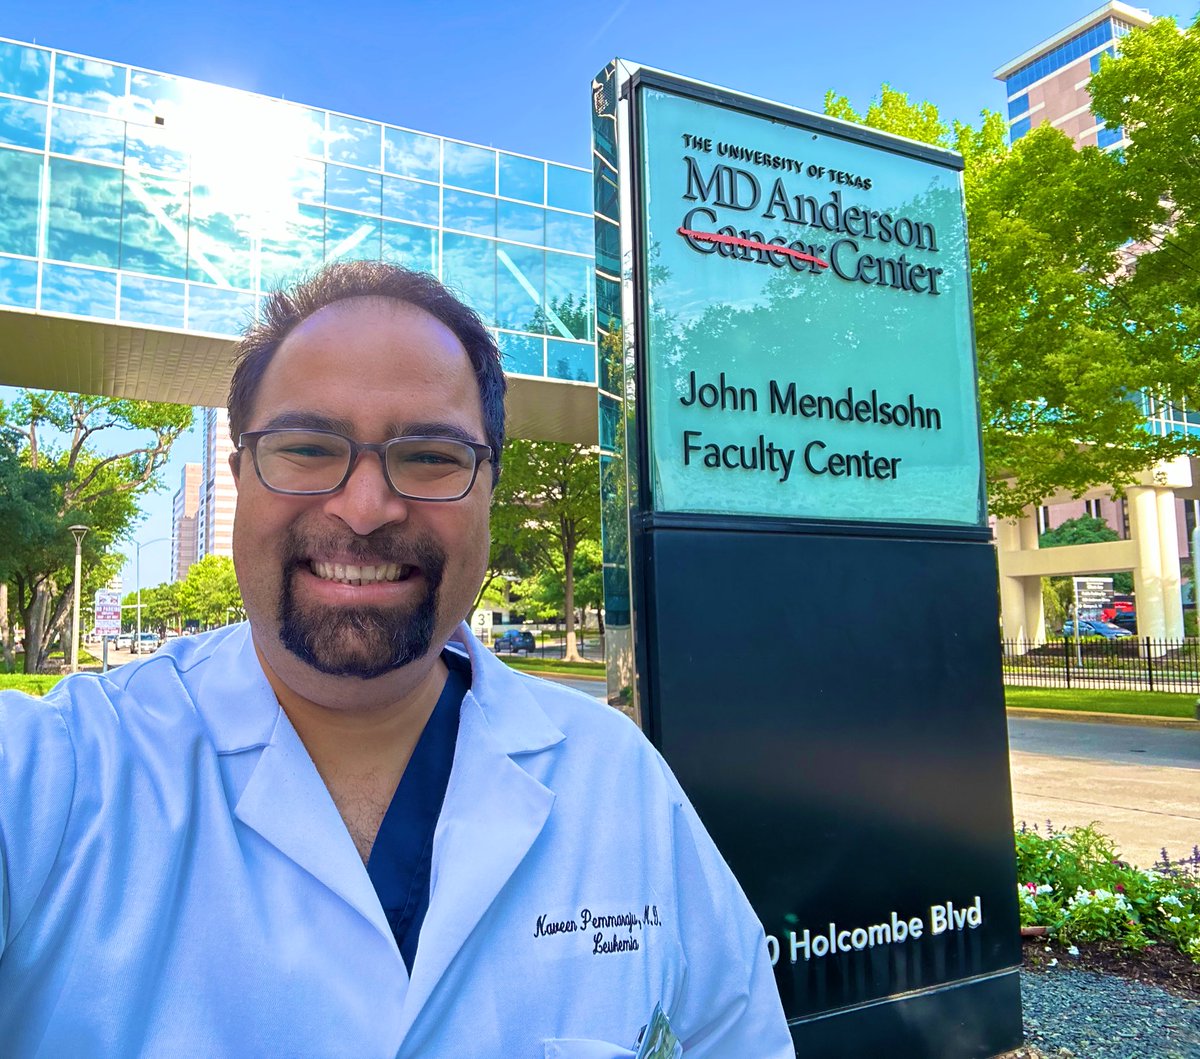 👉👉👉#FridayLeukemiaClinic Sending good wishes & good vibes from my clinic to yours to all over the world 🌍 from @MDAndersonNews because at the end of the day #WeAreAllInThisTogether to #endcancer 🙏 #leusm #BPDCN #MPNSM #hope #possibility #Leadership | @Aiims1742 @sanamloghavi